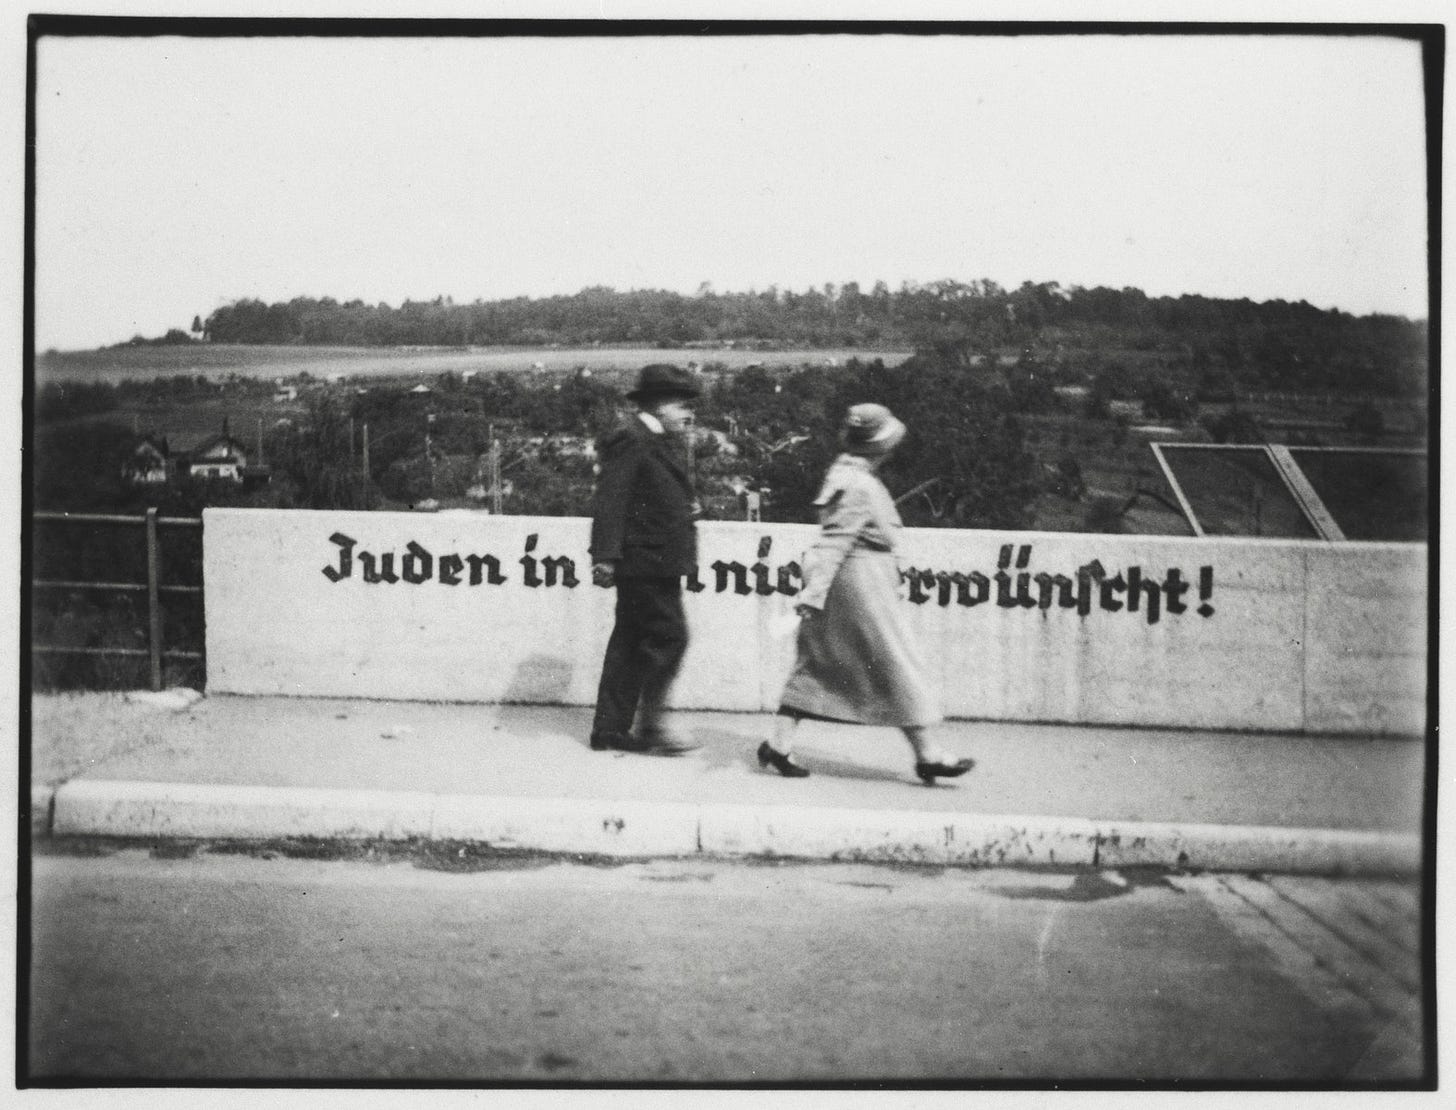 A Jewish gentleman and his daughter cross the Stuttgarter Strasse bridge in Ulm that is painted with the sign "Jews are not desireable in Ulm".